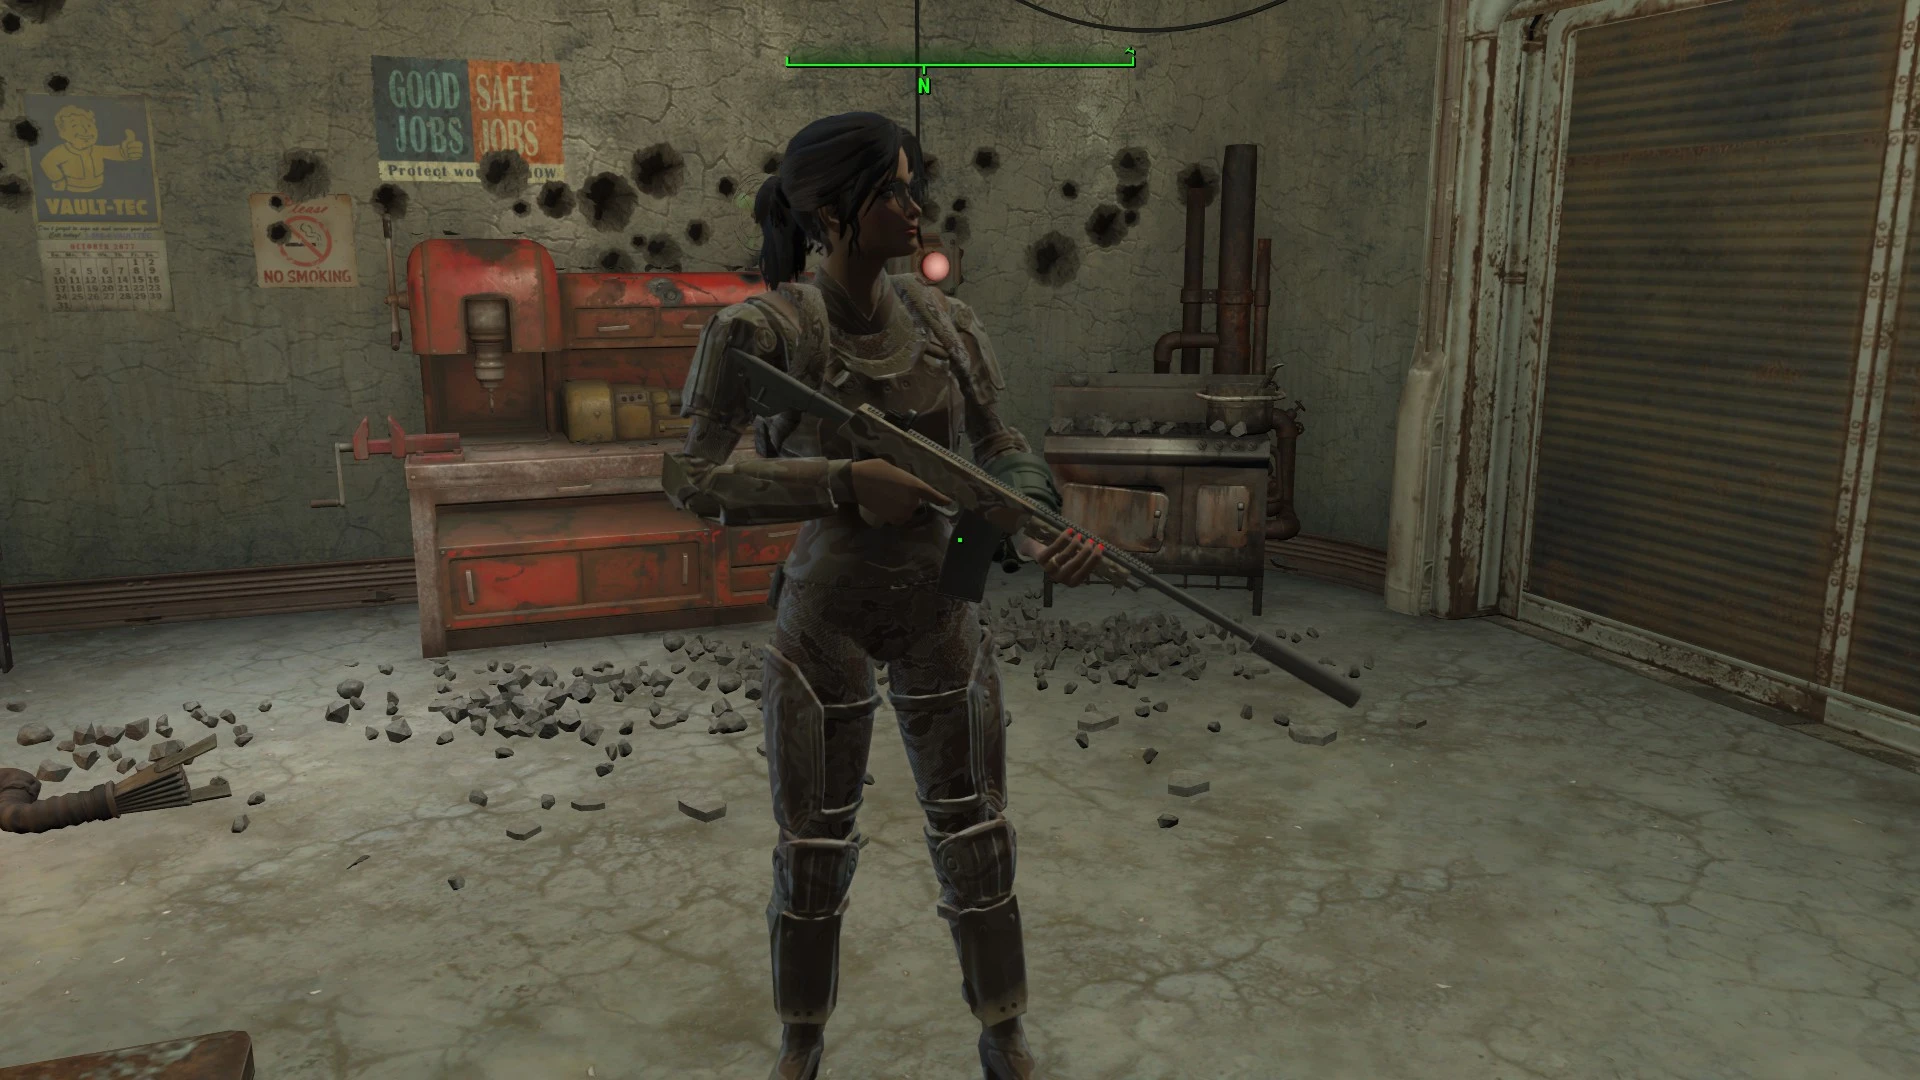 The combat zone fallout 4 фото 35